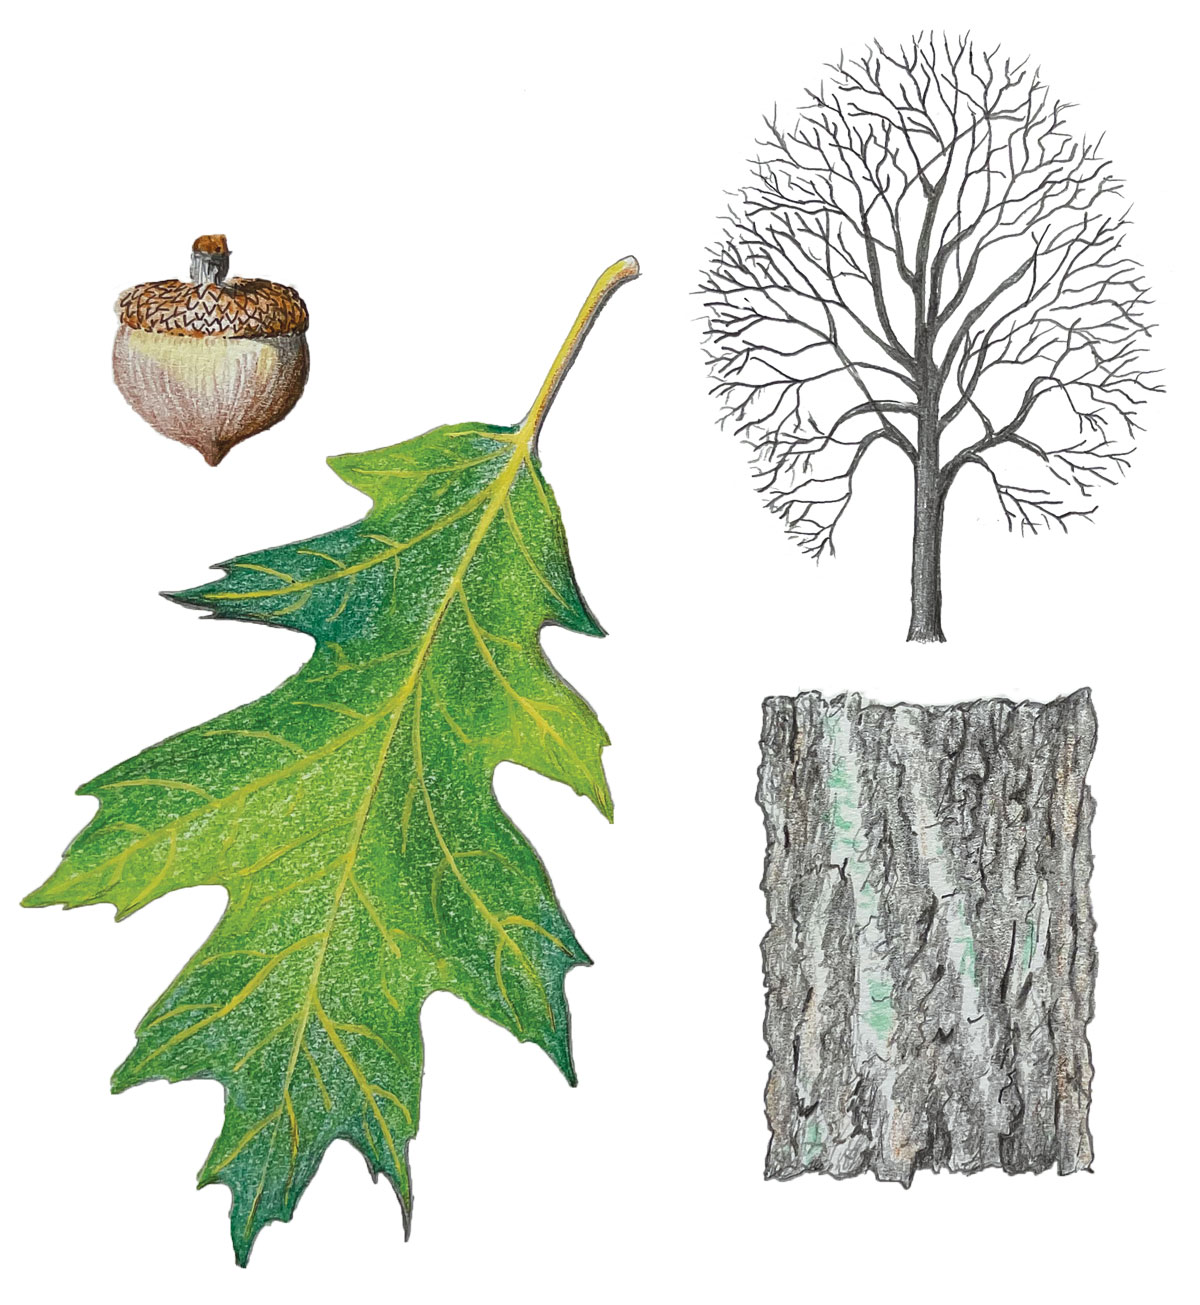 drawing of a red oak tree, acorn, bark, and leaf